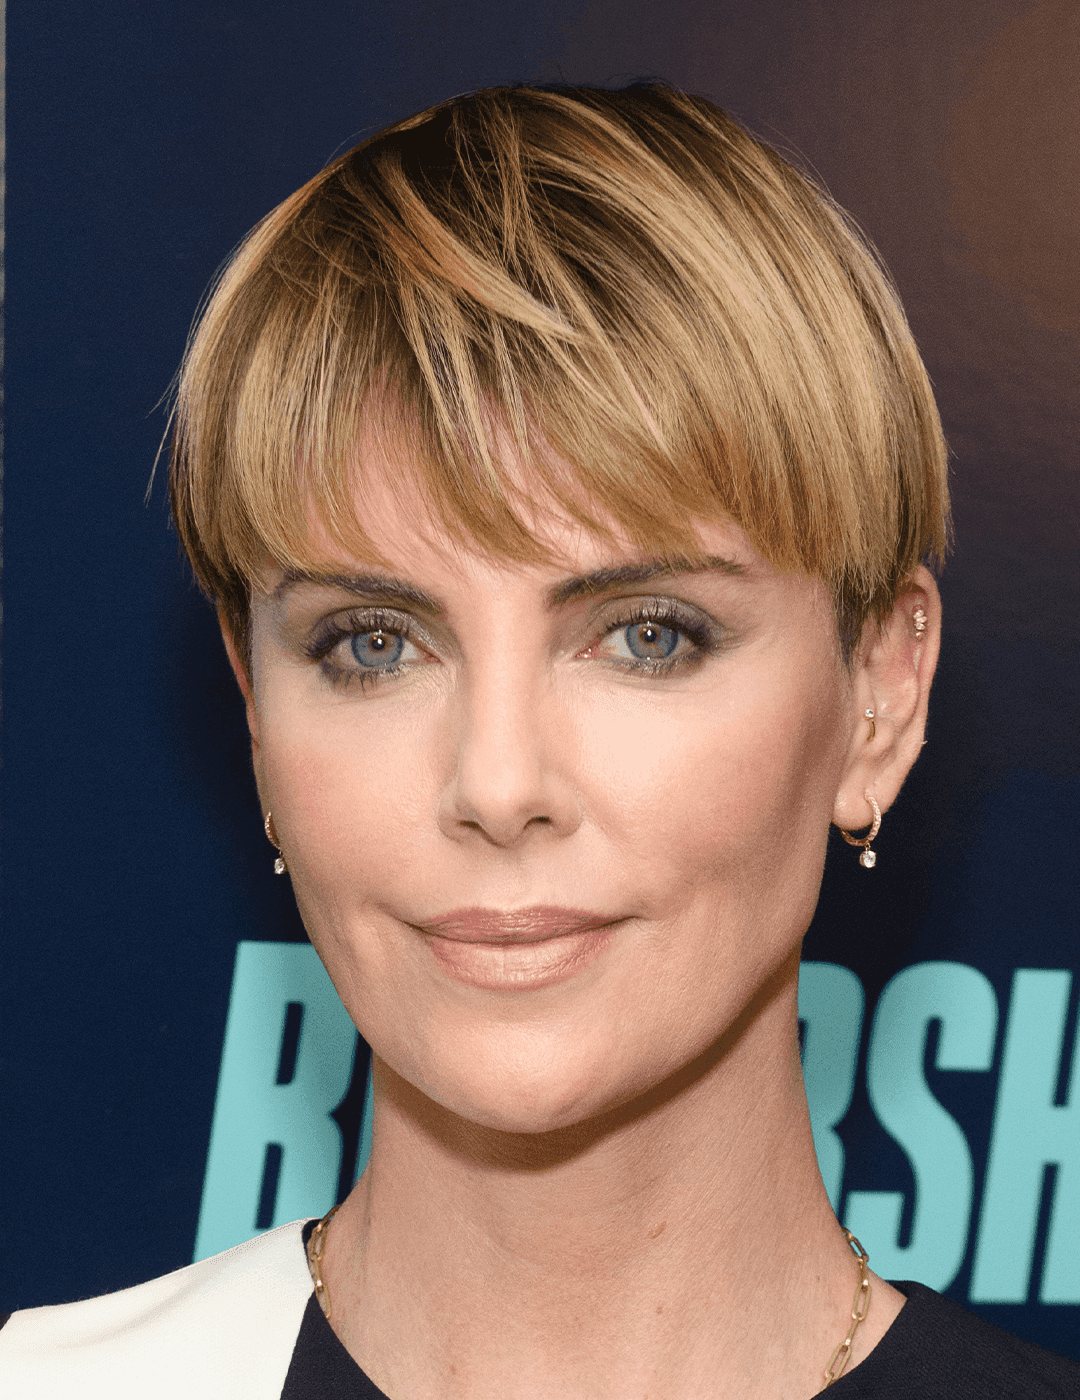 Charlize Theron rocking a bowl cut hairstyle and soft smoky eye makeup look